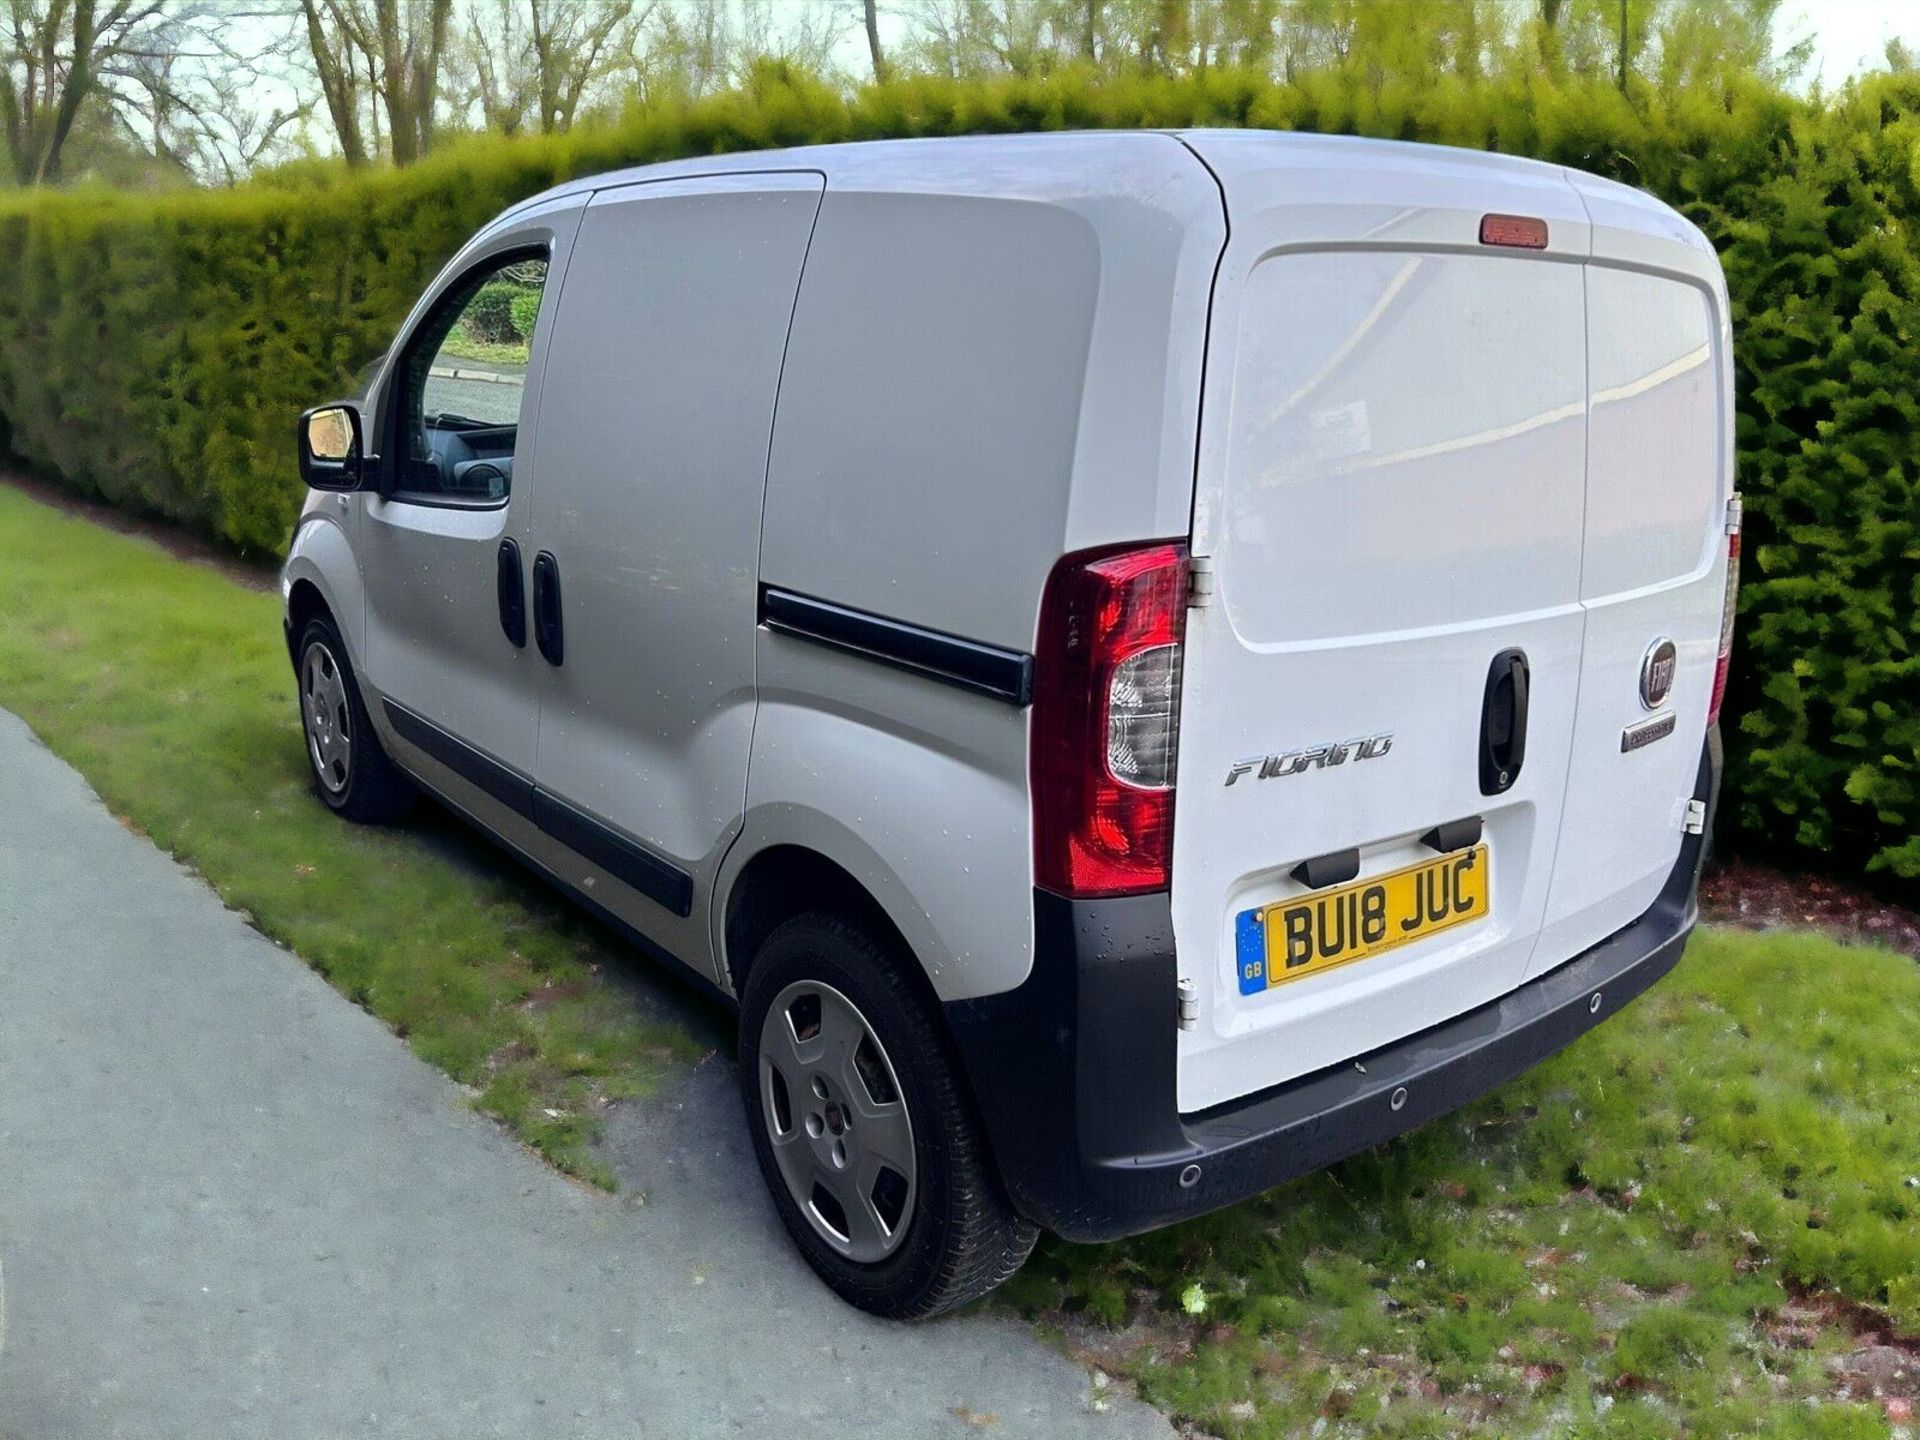 2018 FIAT FIORINO VAN - WELL-MAINTAINED, MOT UNTIL 04/2025, FULL SERVICE HISTORY - Image 3 of 6